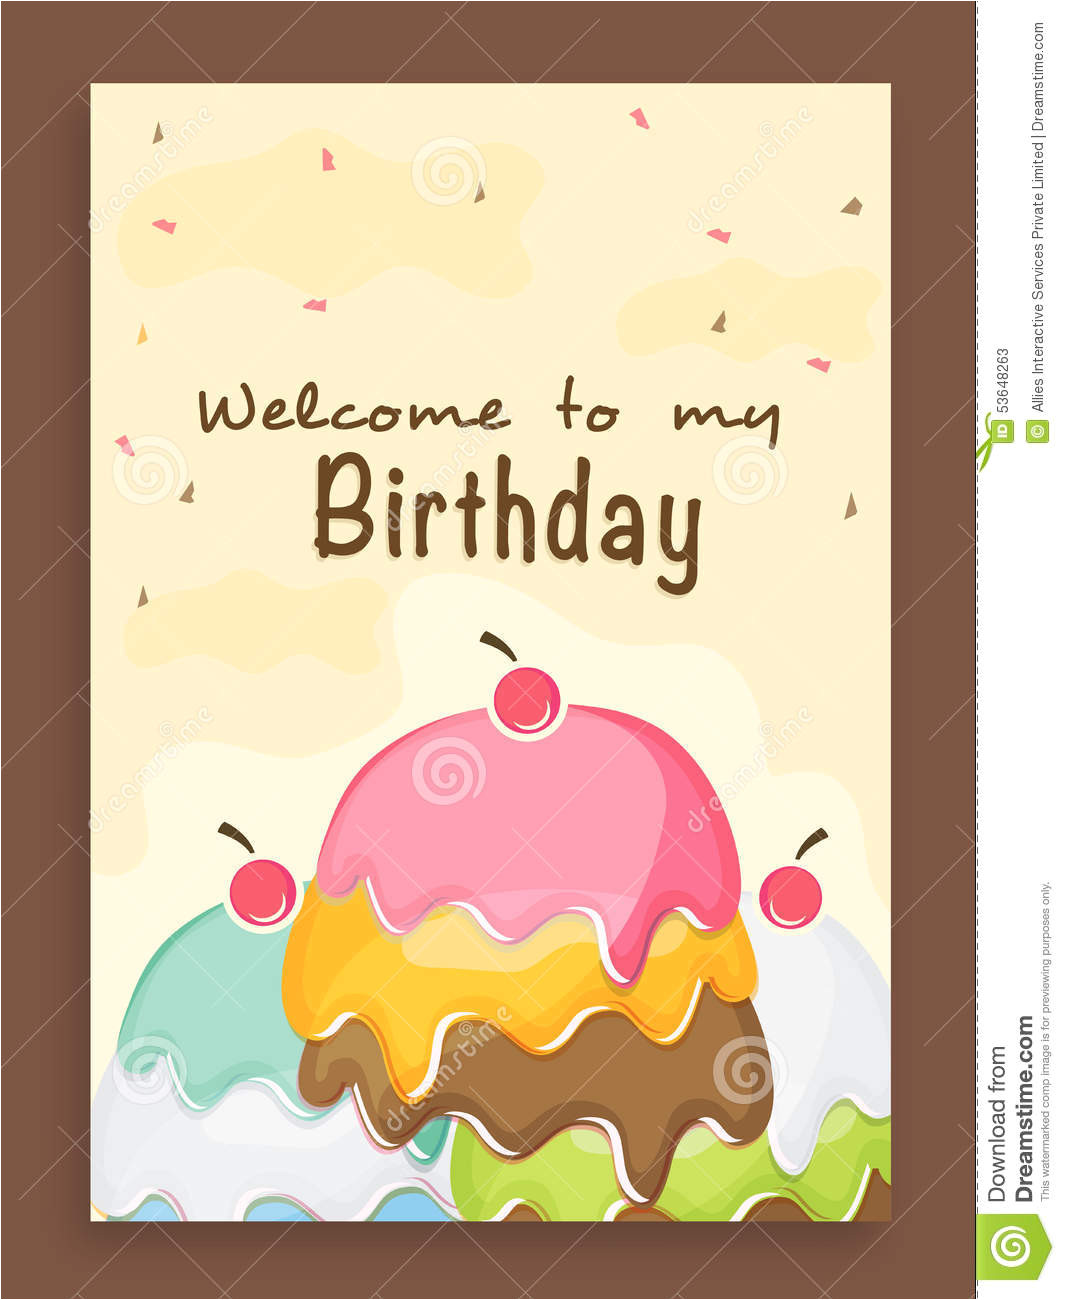 Party Invitation Cards Design Invitation Card Design for Birthday Party Stock Photo